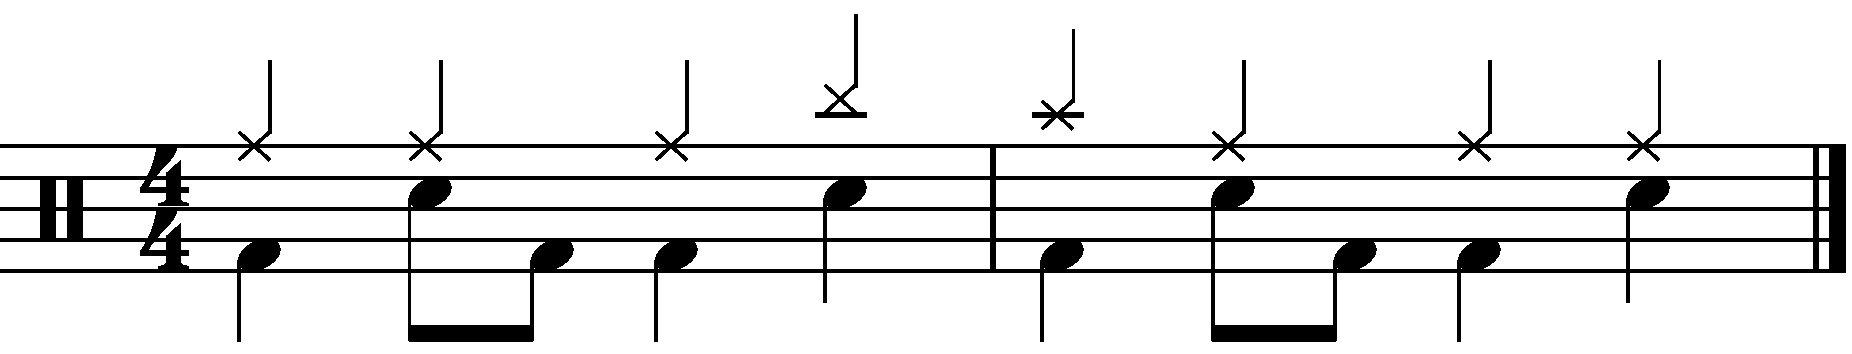 The concept applied to a common time groove with quarter note right hands